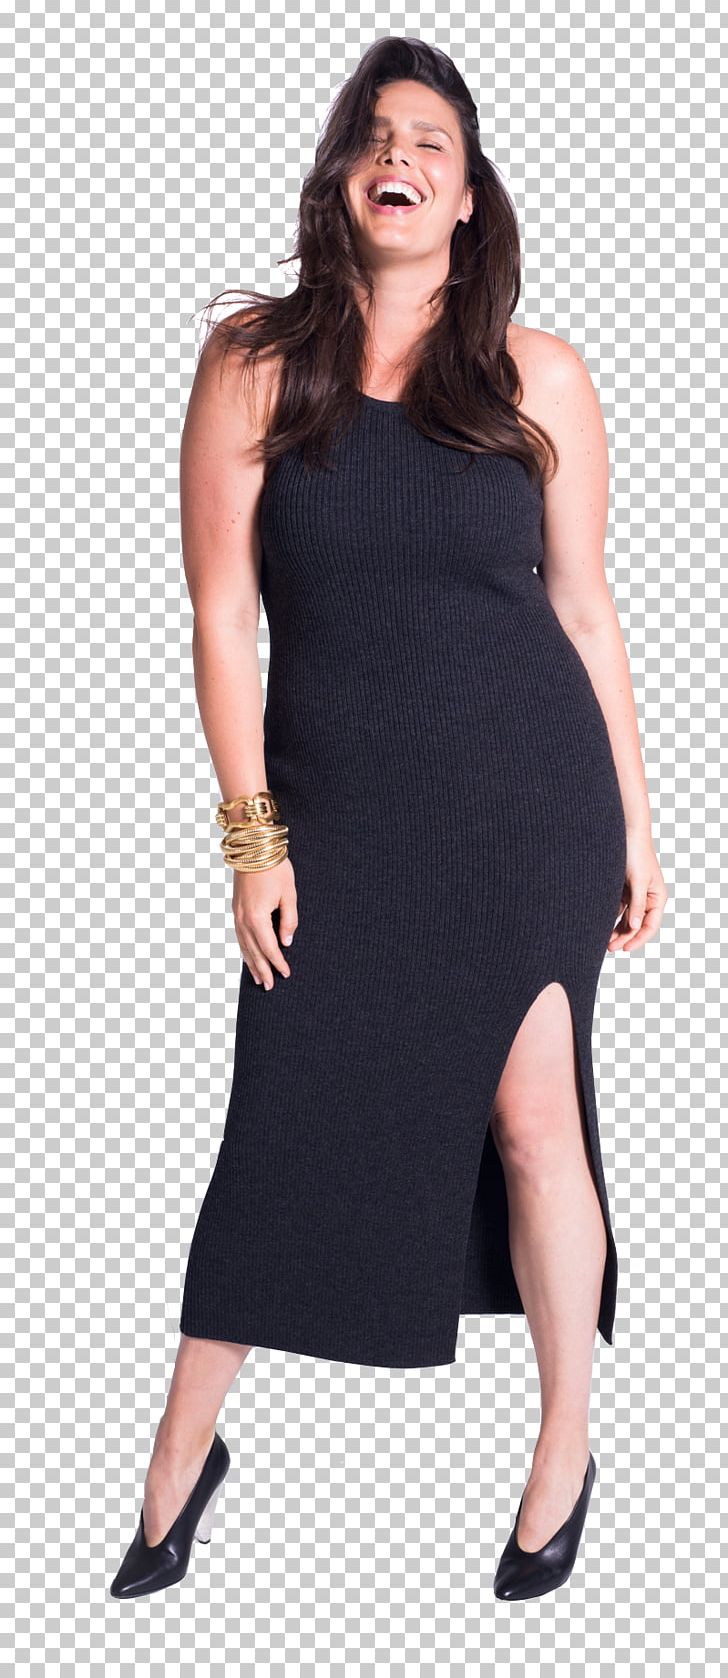 Little Black Dress T-shirt Plus-size Clothing Plus-size Model PNG, Clipart, Black, Clothing, Clothing Sizes, Cocktail Dress, Collection Free PNG Download